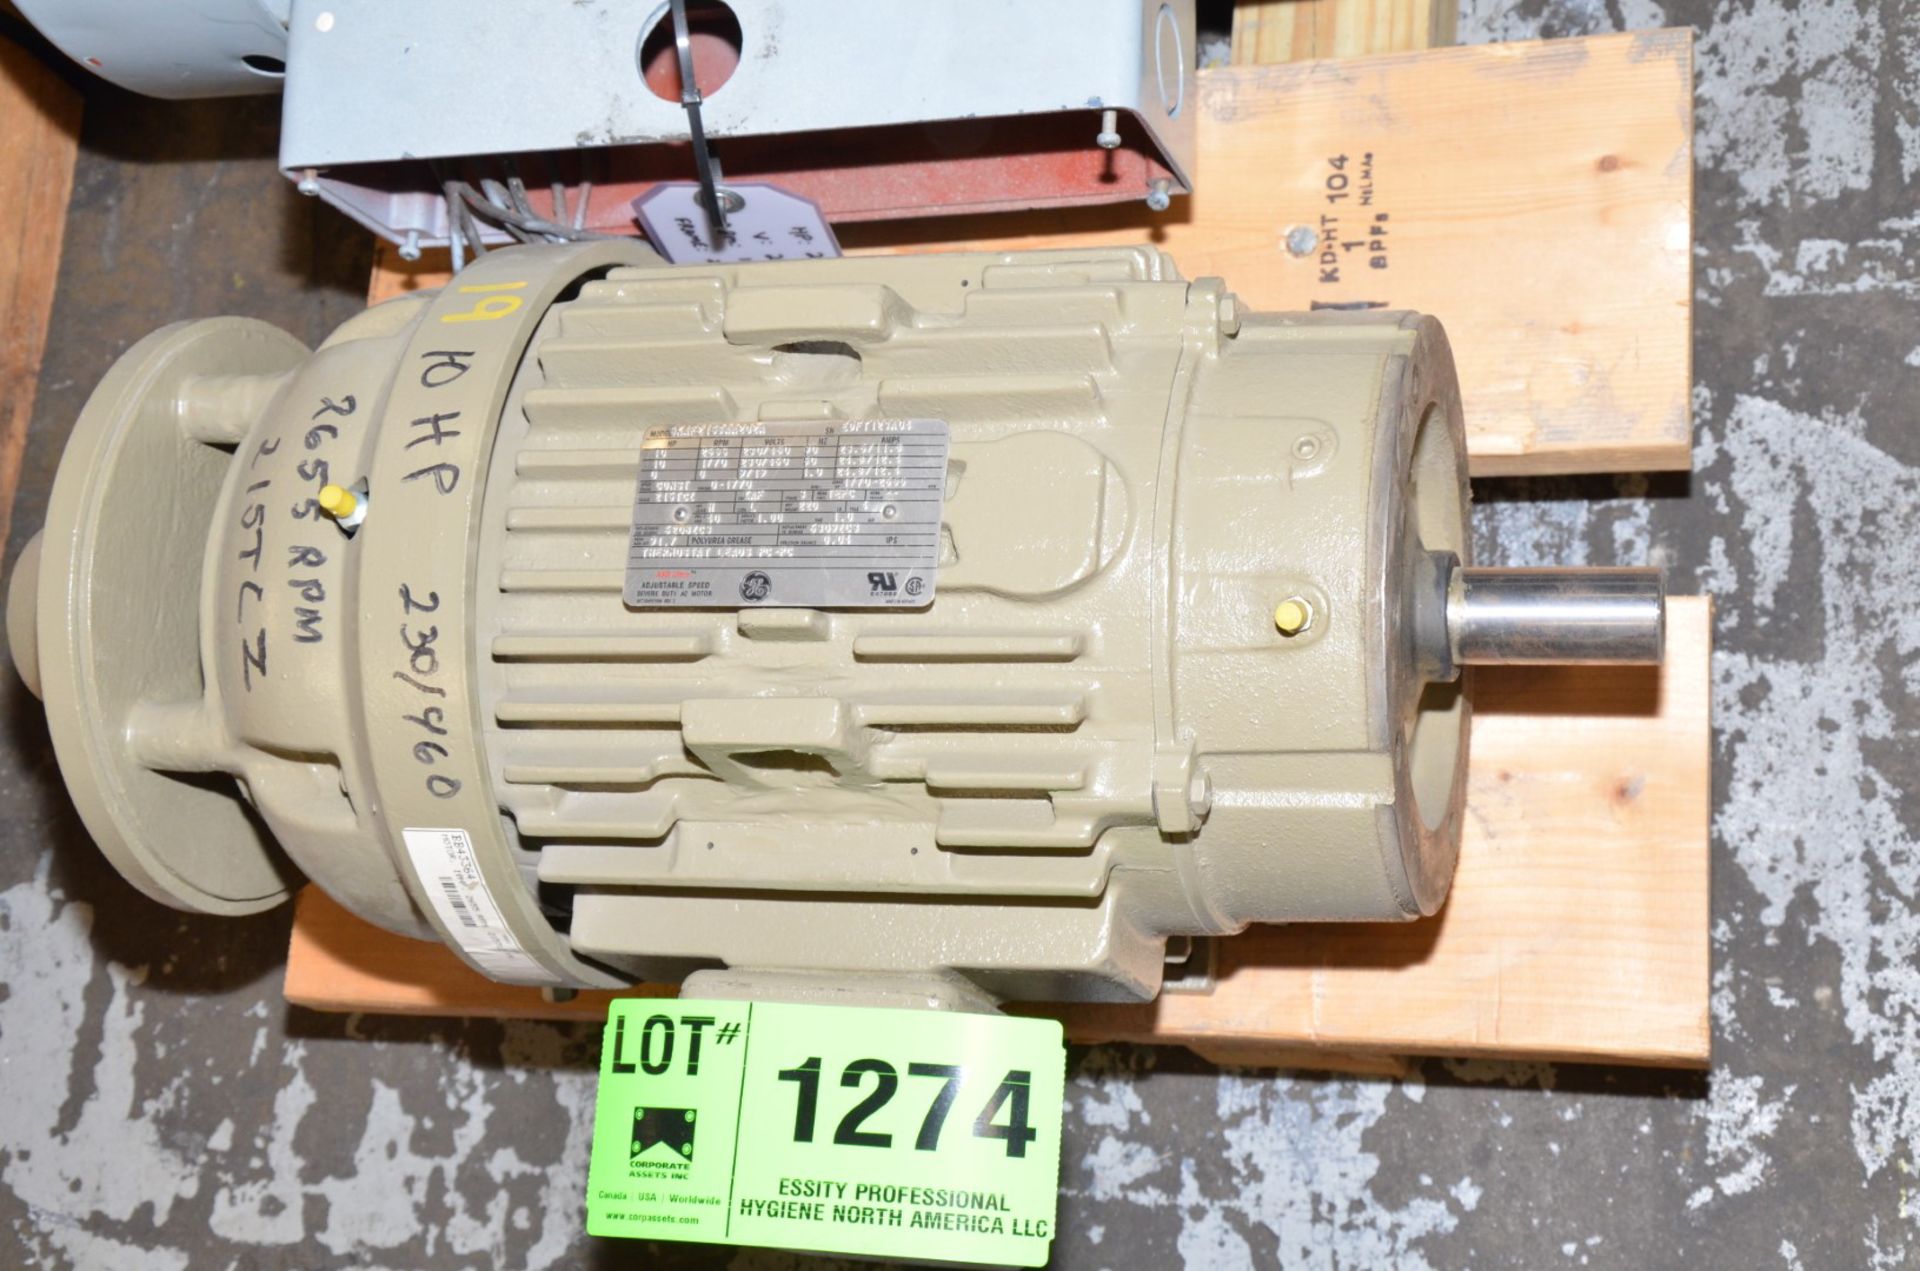 GE 10 HP 460V 1770 RPM ELECTRIC MOTOR [RIGGING FEE FOR LOT #1274 - $25 USD PLUS APPLICABLE TAXES]